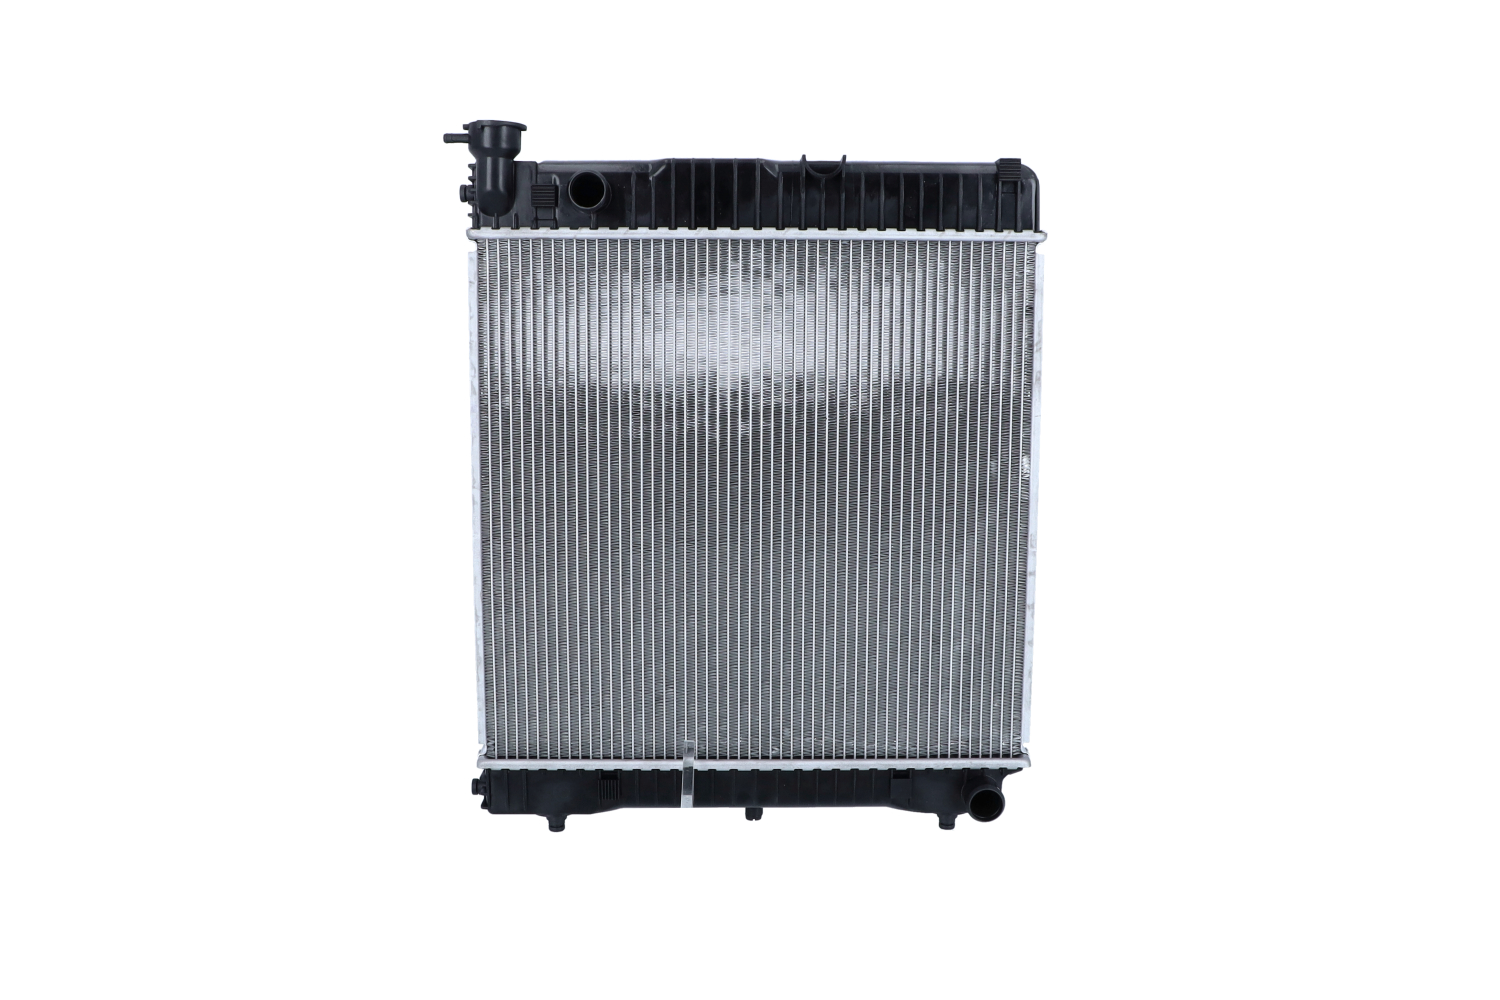 NRF 507665 Engine radiator Aluminium, 505 x 476 x 34 mm, with mounting parts, Brazed cooling fins